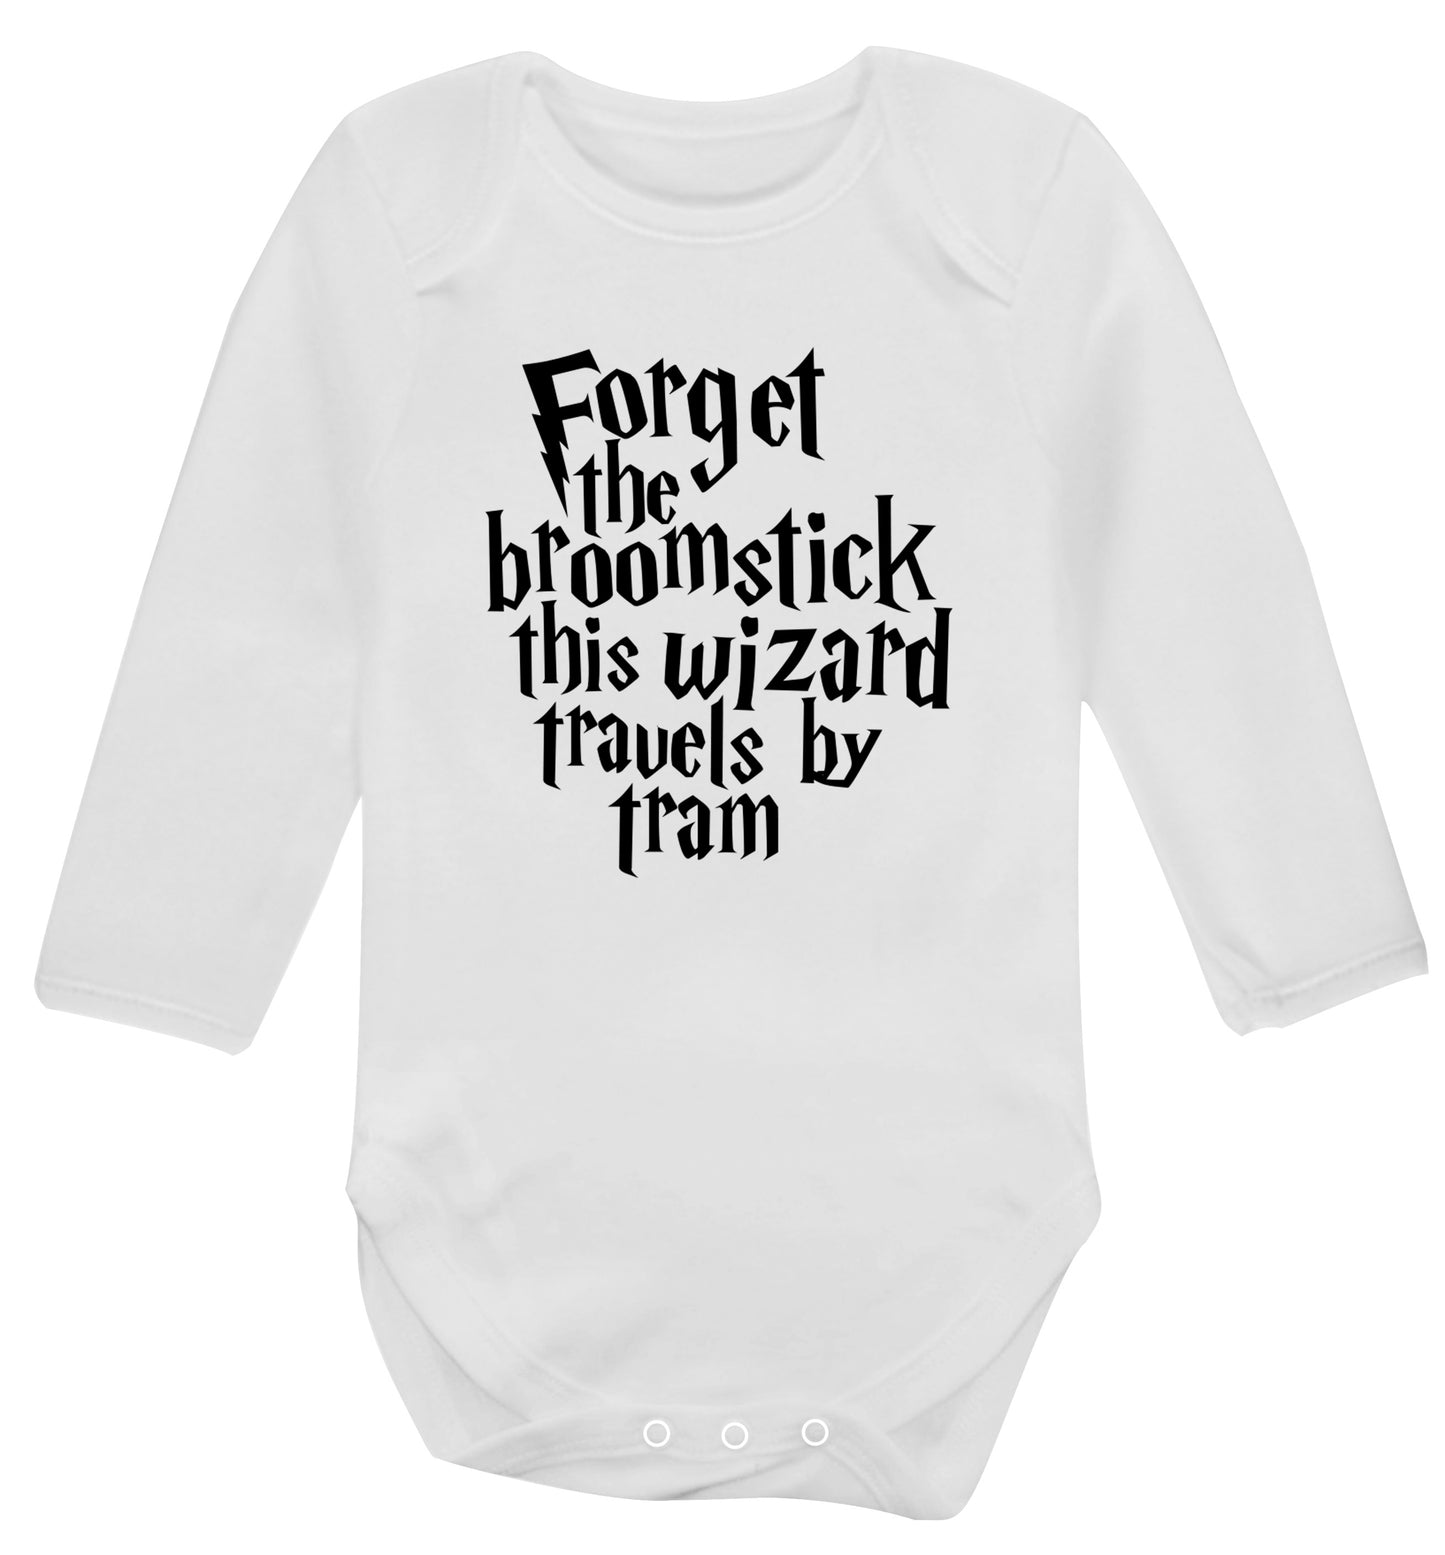 Forget the broomstick this wizard travels by tram Baby Vest long sleeved white 6-12 months